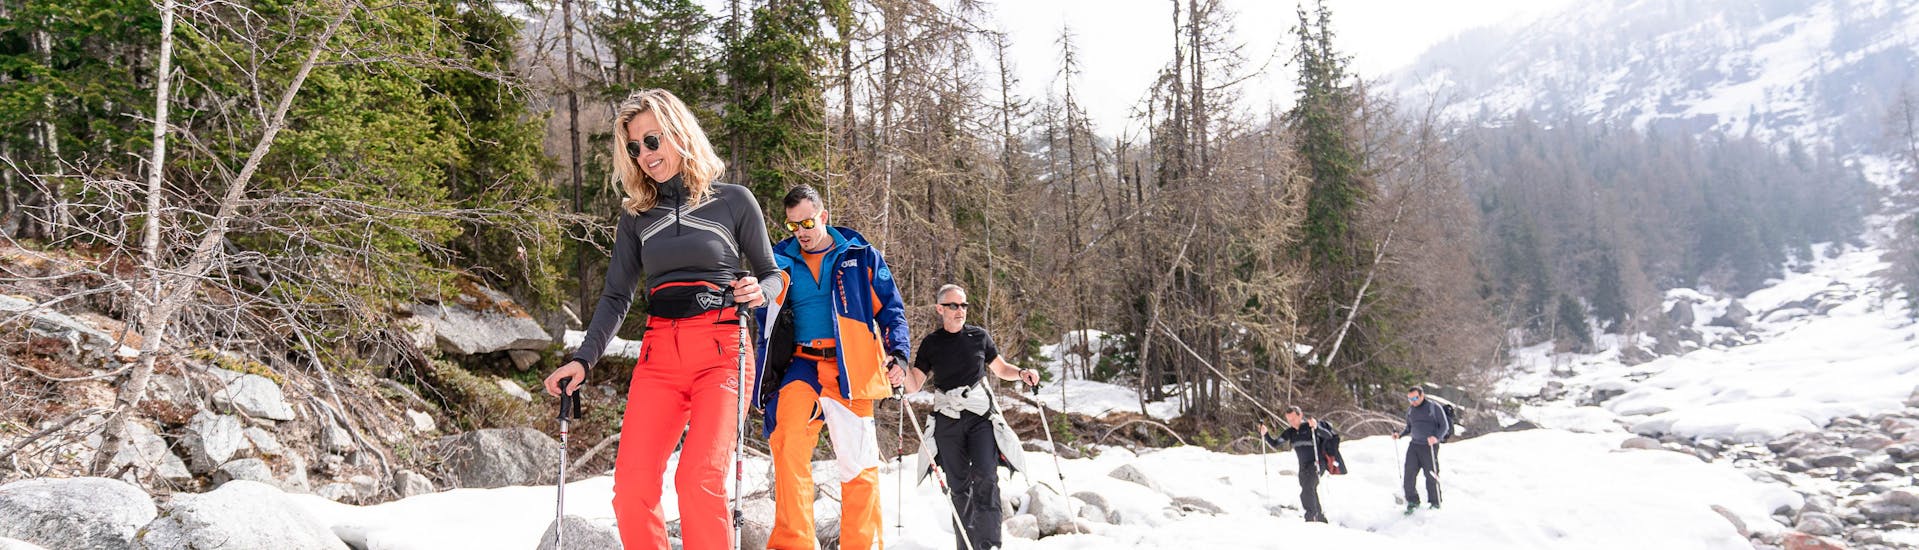 Friends are doing a Private Snowshoeing Tour in Chamonix with Evolution 2 Chamonix.